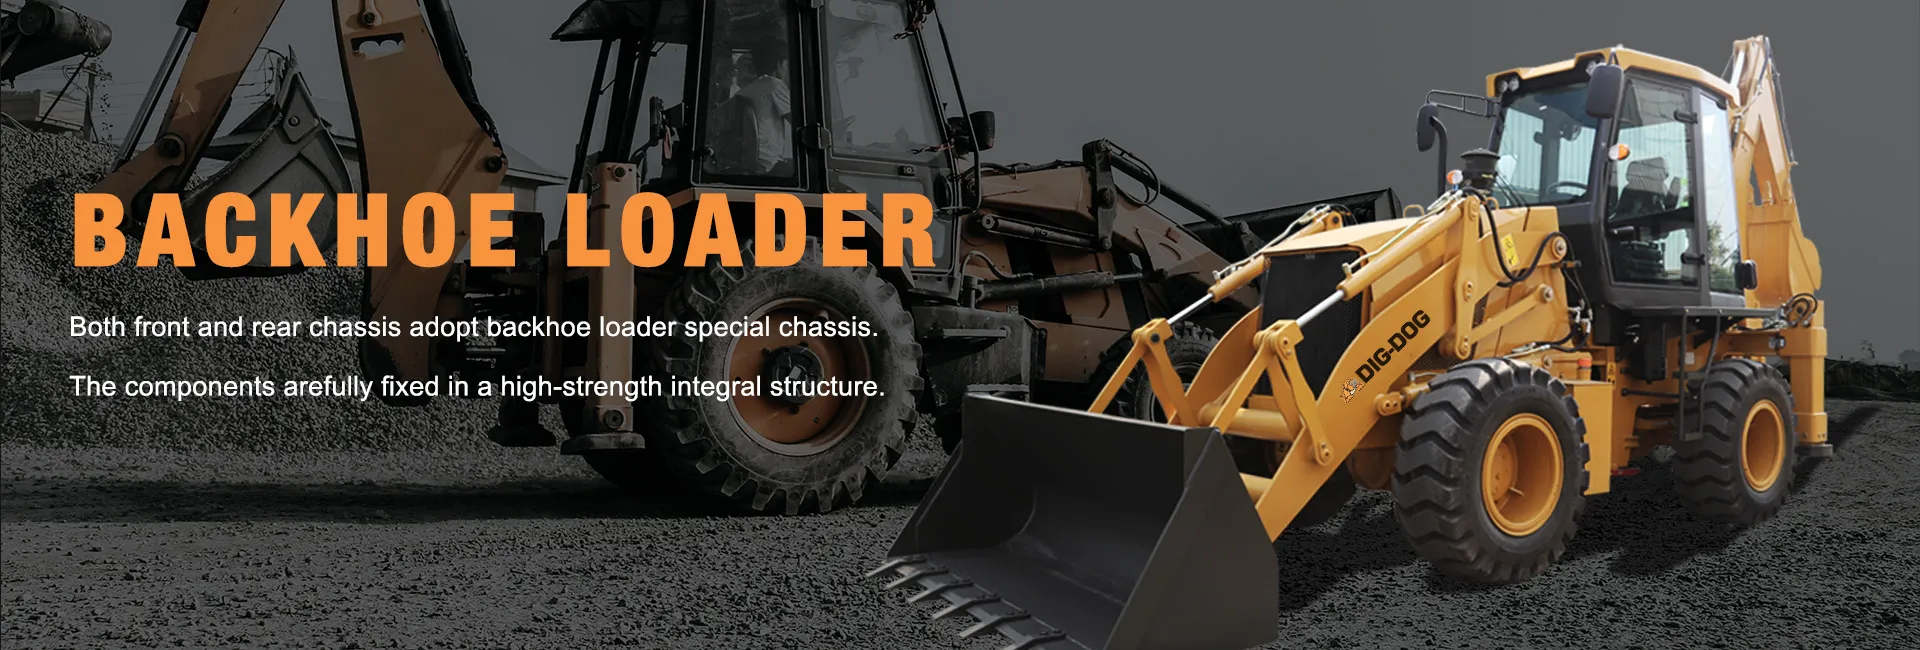 About Backhoe loaders and their functions